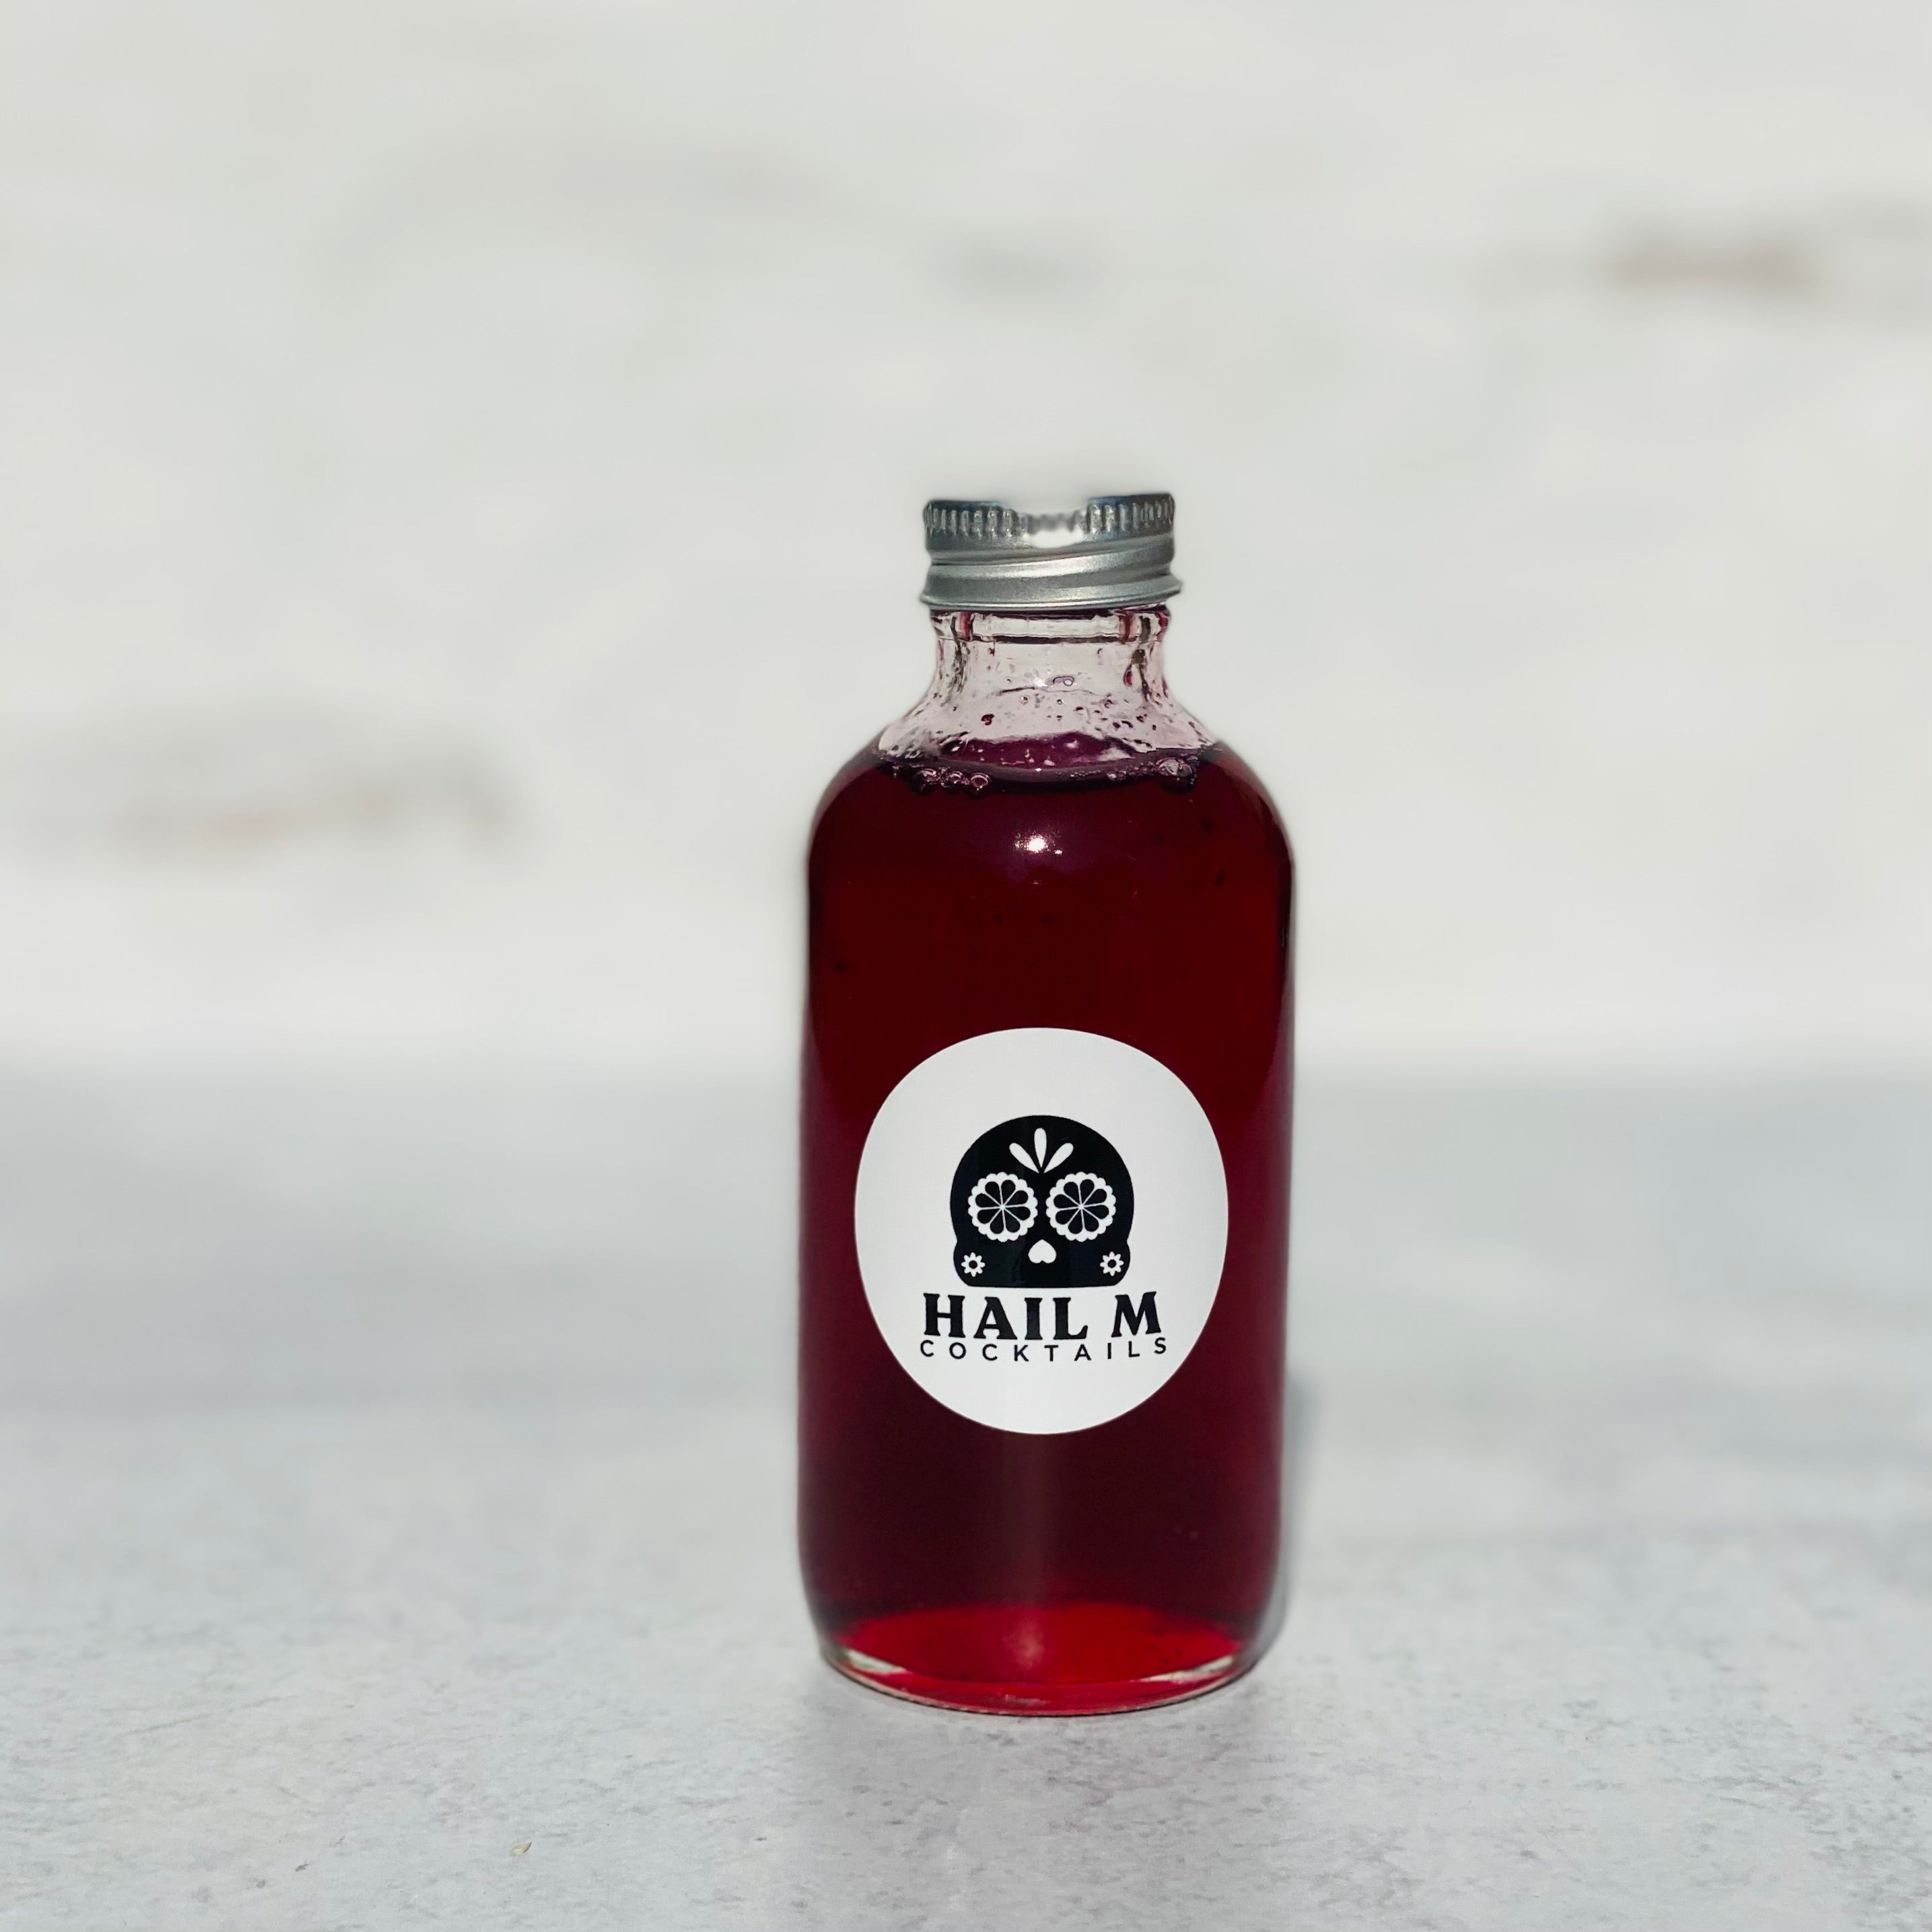 Hibiscus Flower Syrup - Hail M